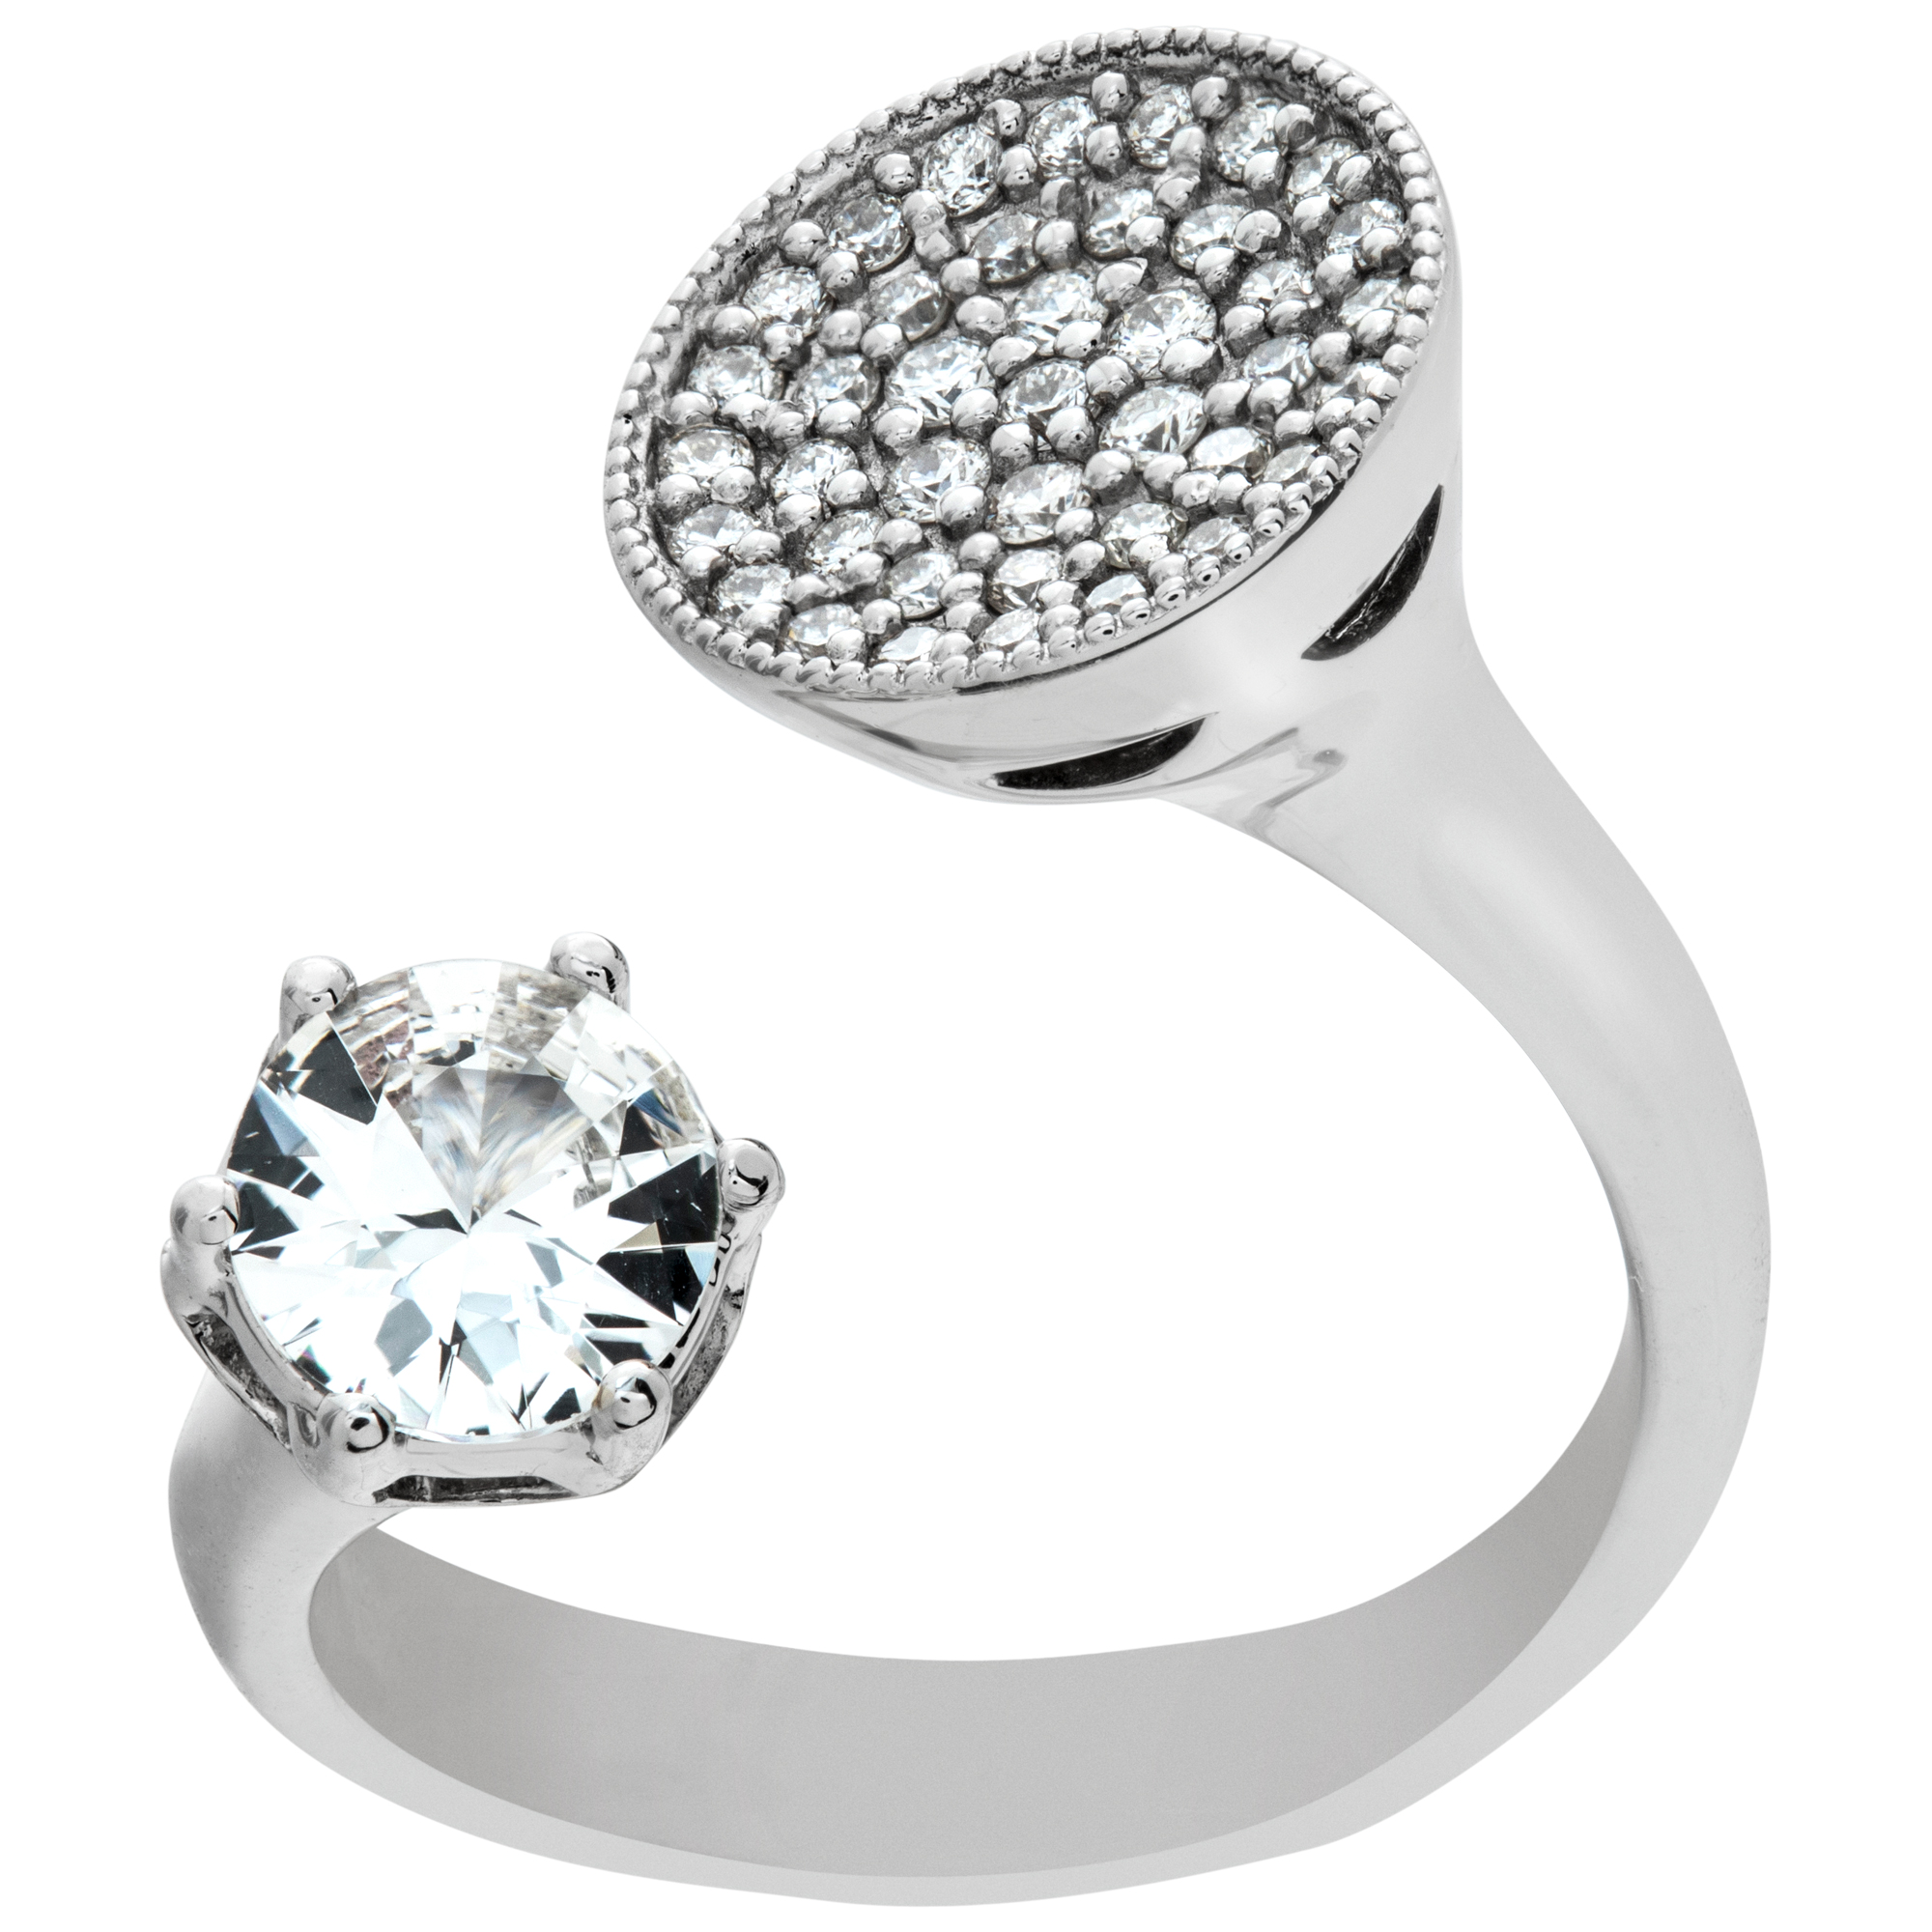 Pave Diamond and white sapphire ring set in 18k white gold. Size 5.75